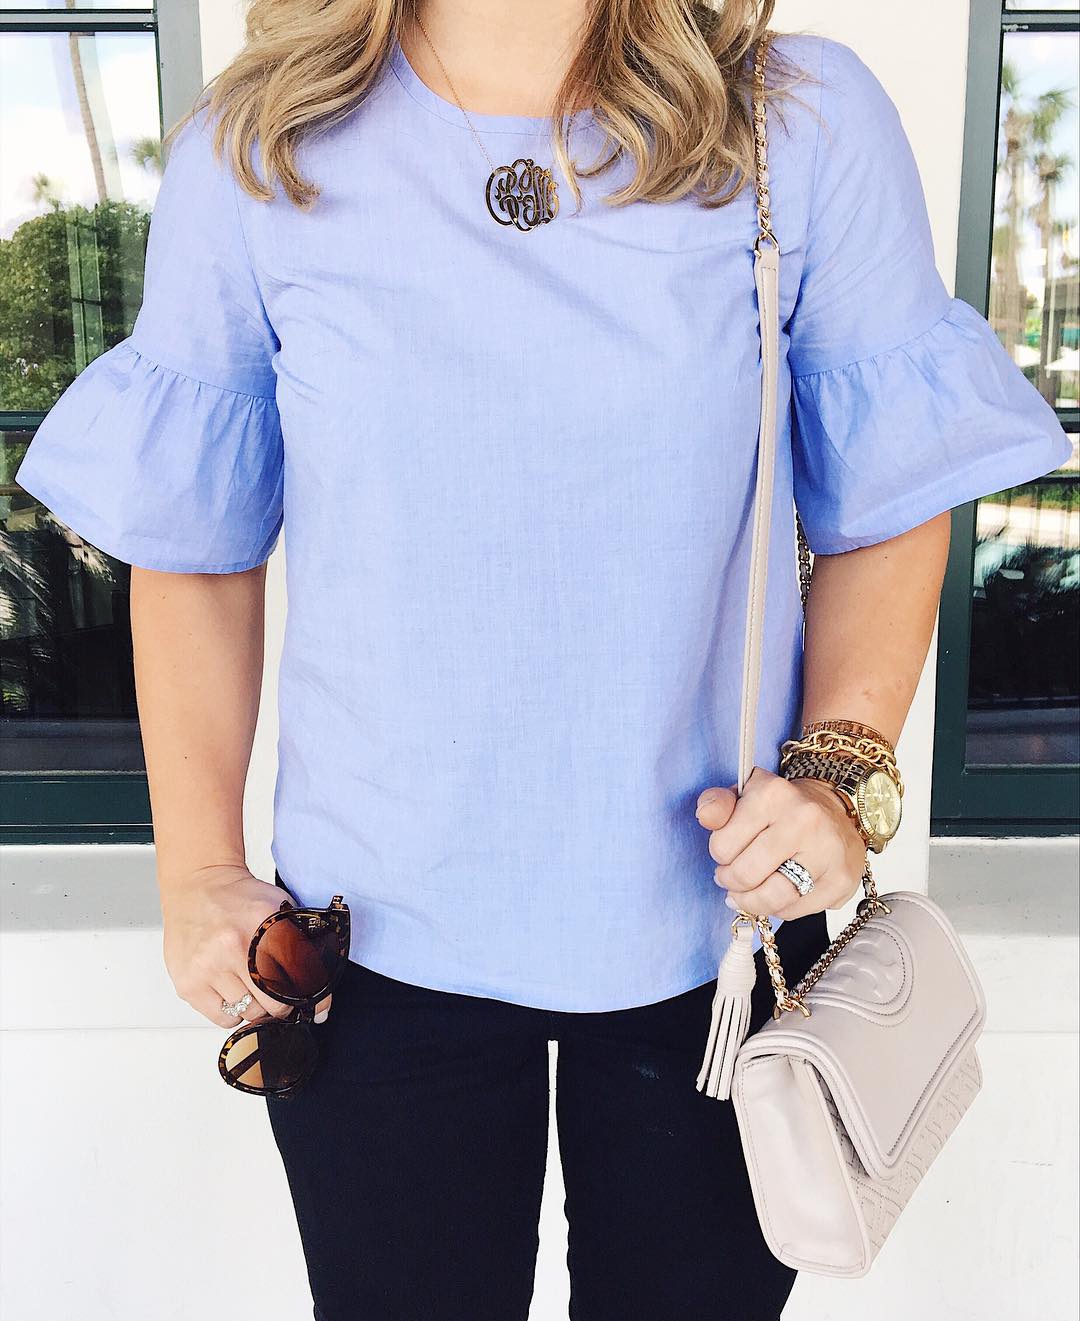 The Southern Style Guide, Instagram Accounts to Follow For Outfit Inspiration, Style Blogger, SC Blogger, Casual Style, Classic Style, Spring Outfit Inspiration